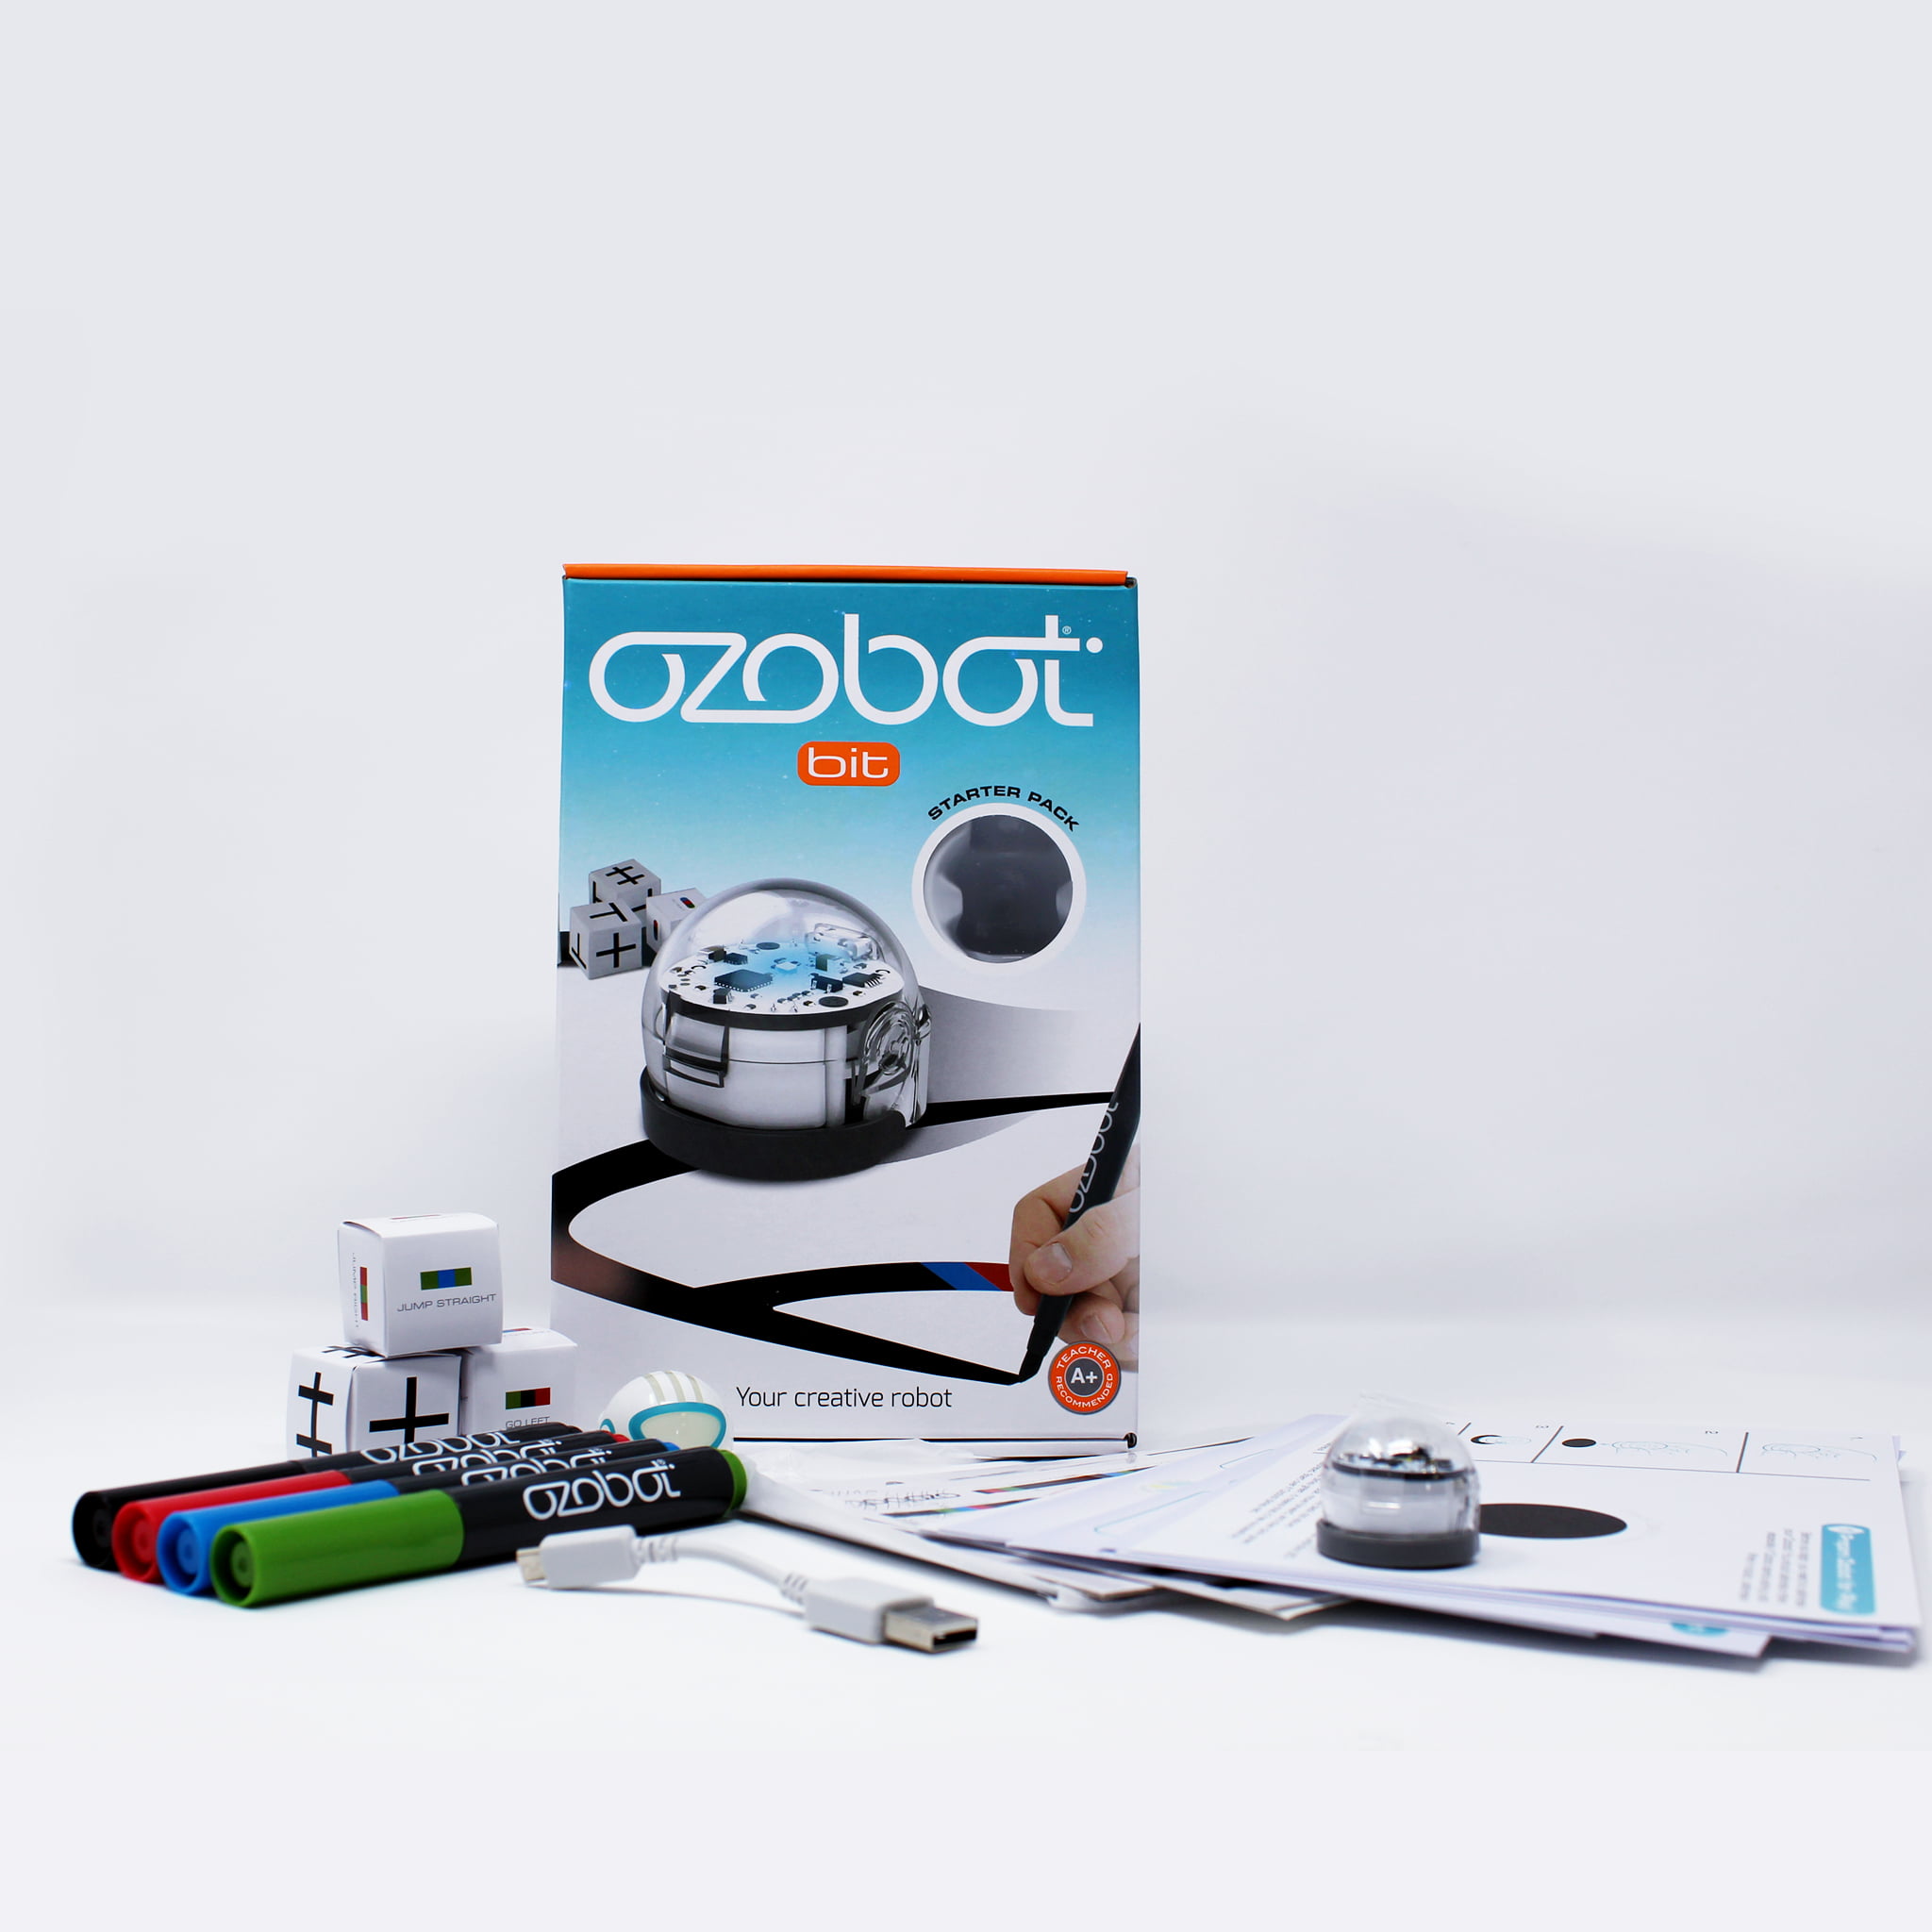 Ozobot 2.0 Bit Starter Pack the Smart Robot Toy that Teaches Coding NEW 2018! 